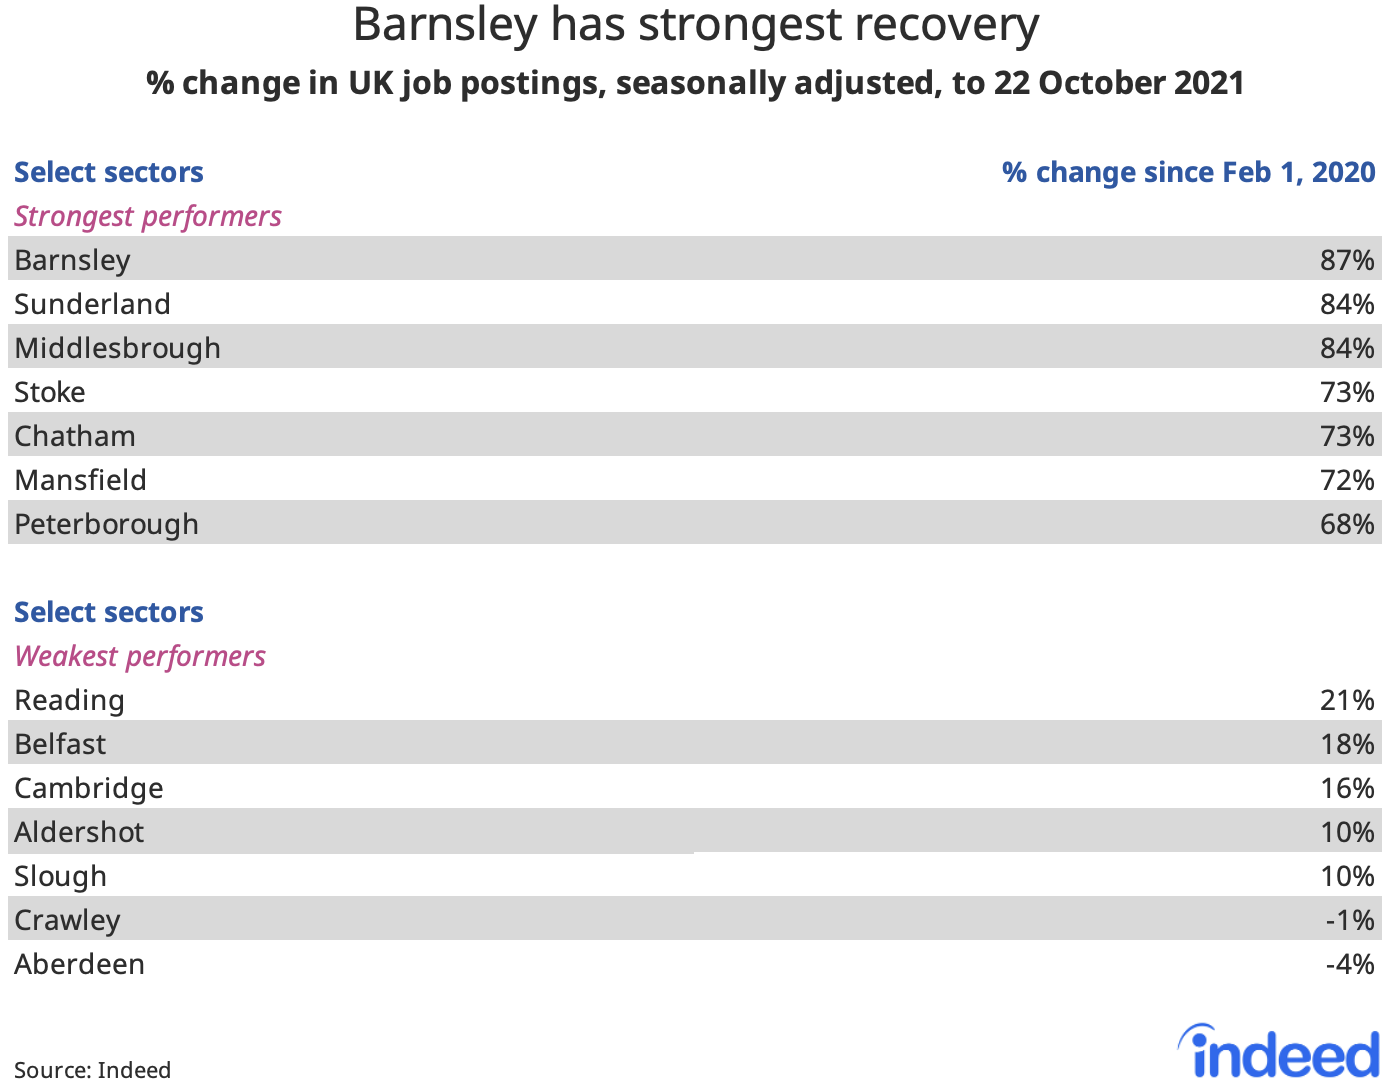 Table titled “Barnsley has strongest recovery.”